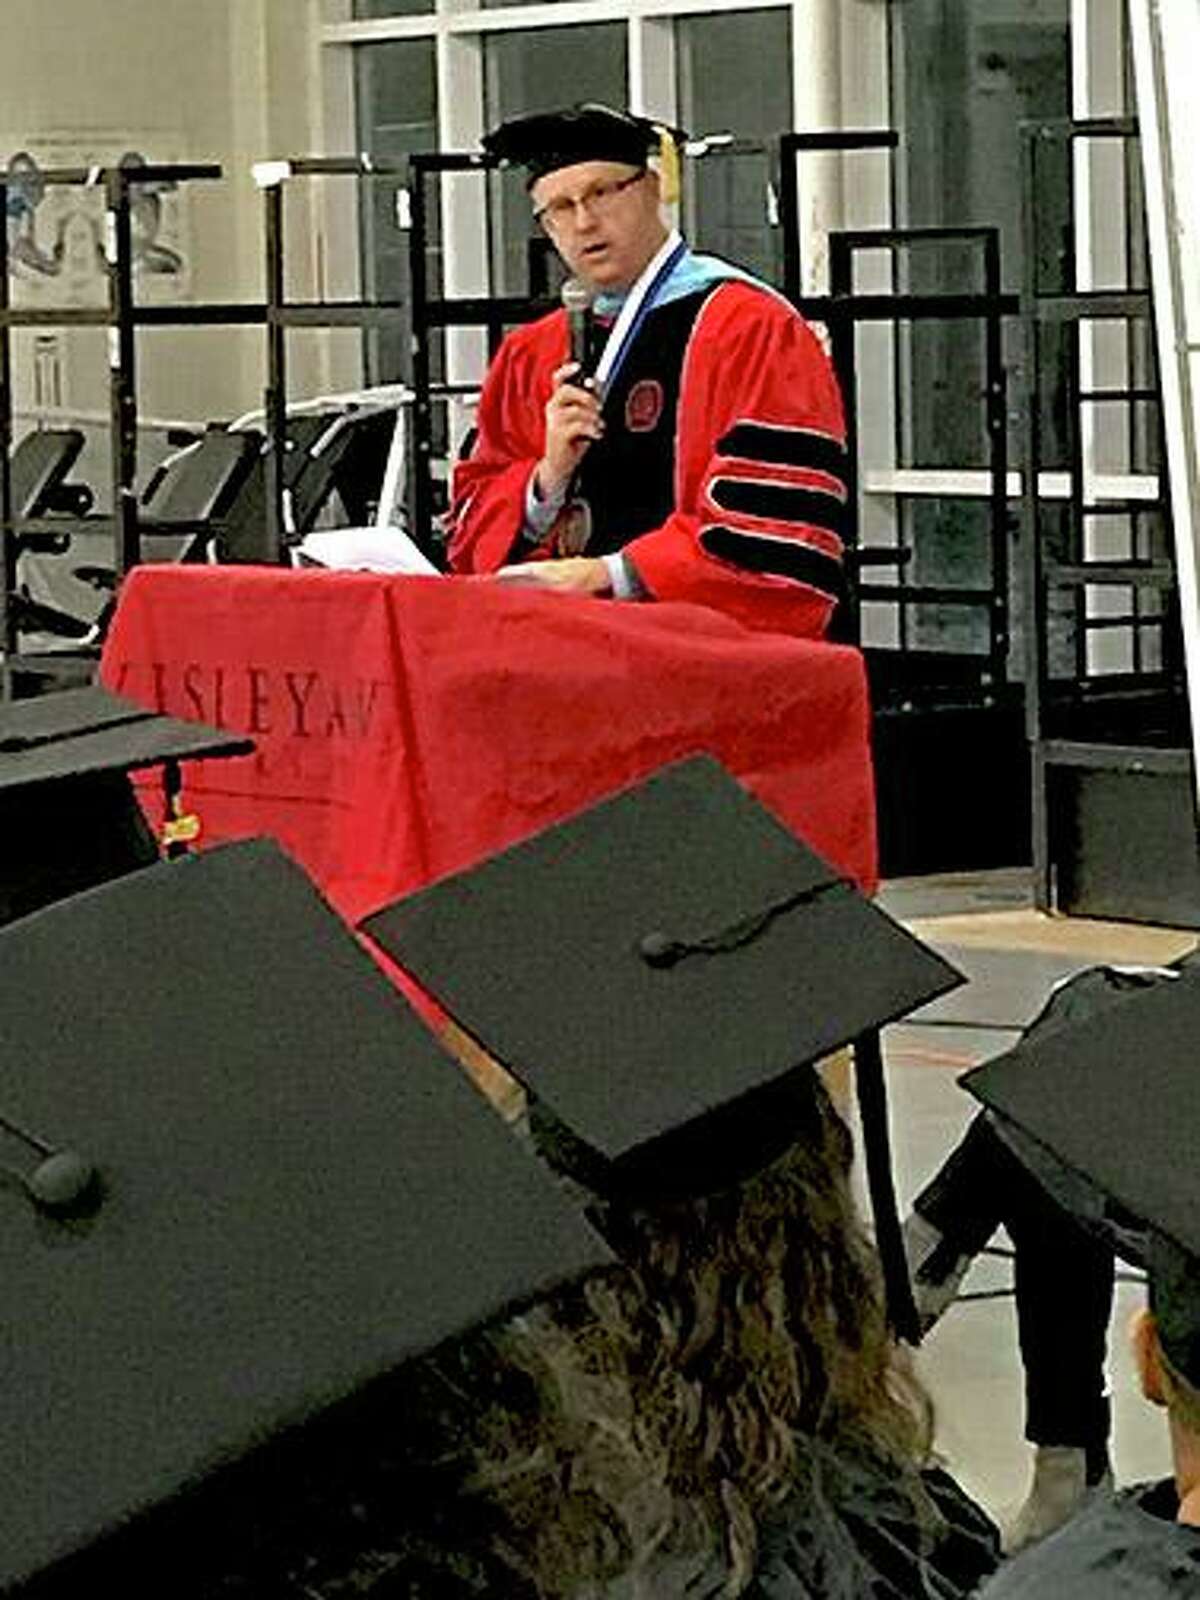 Dr. Steven Minkler, campus chief executive officer, Middlesex Community College, addresses graduates and attendees of the graduation ceremony at York Correctional Institution Tuesday.